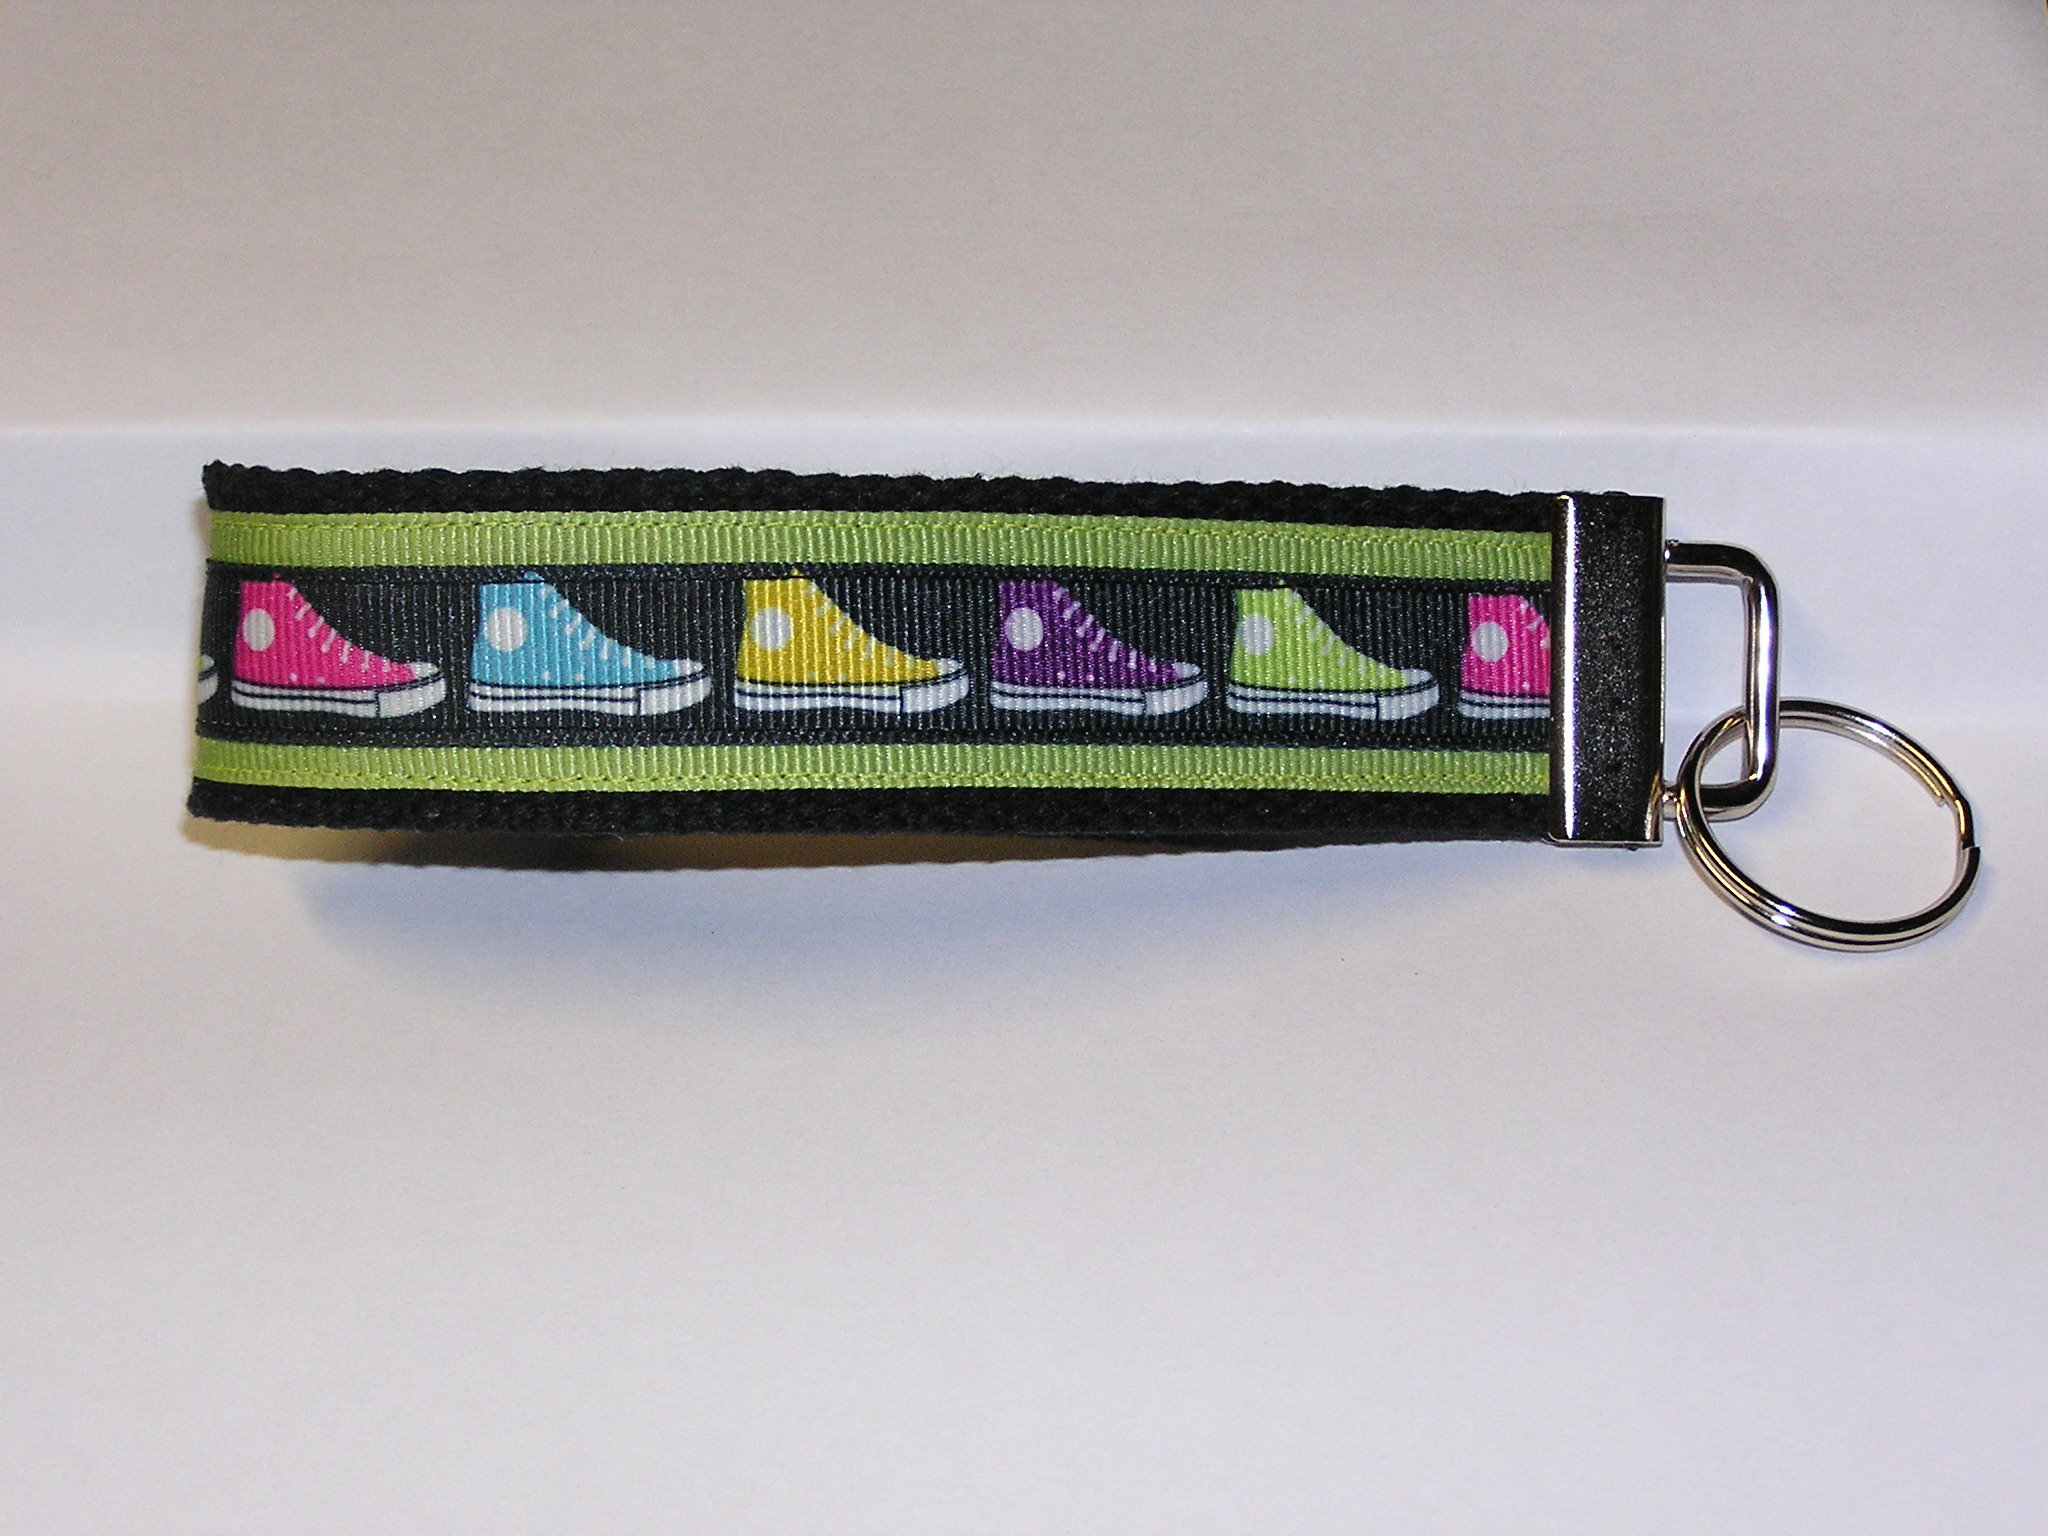 Key Chain for a friend – Sewing Projects | BurdaStyle.com